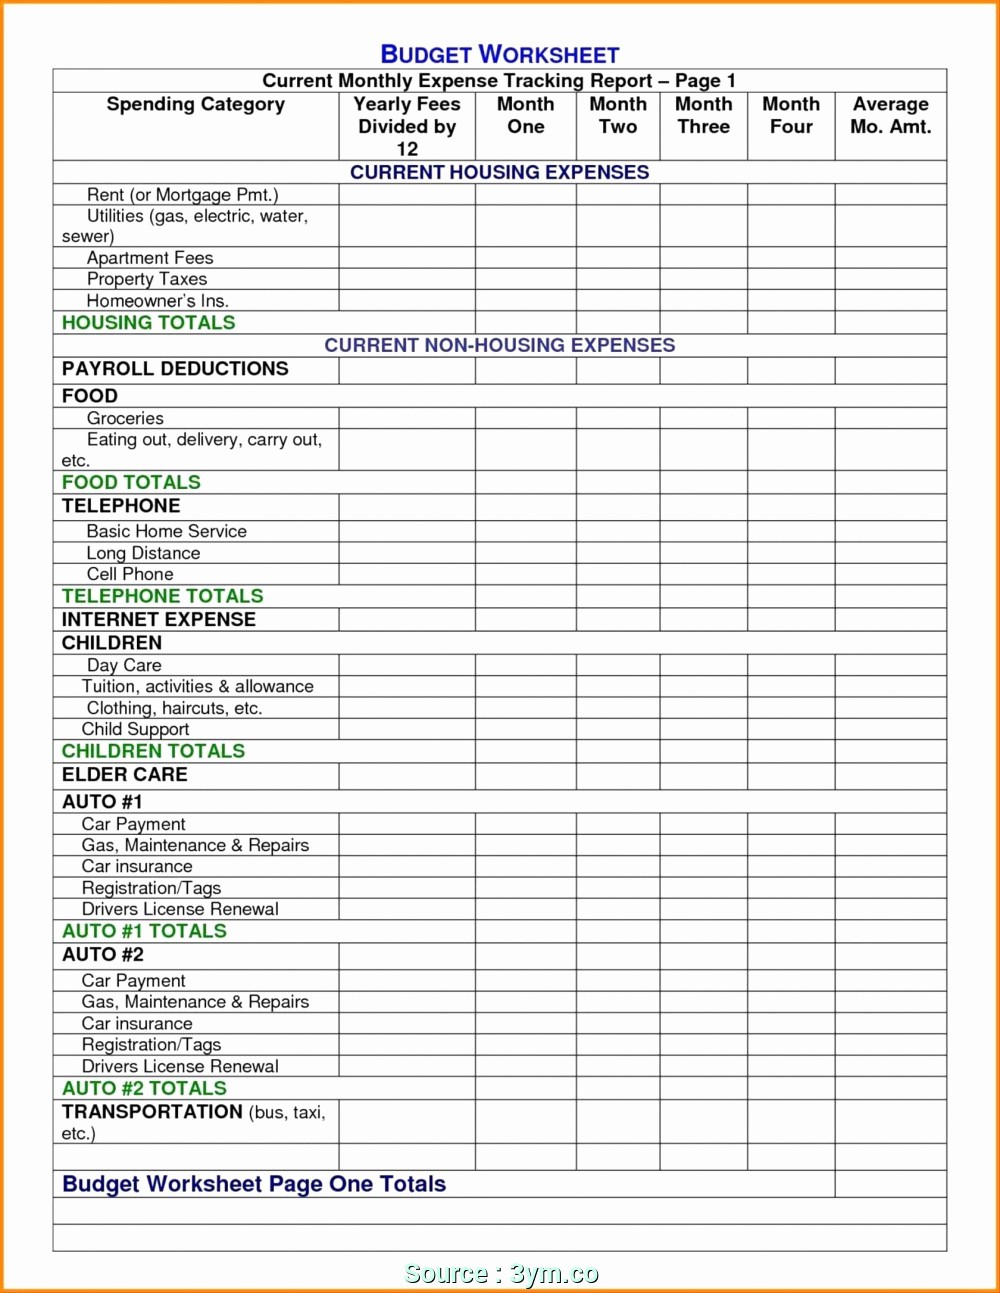 Startup Expenses and Capitalization Spreadsheet Unique 93 Startup Expenses and Capitalization Sample